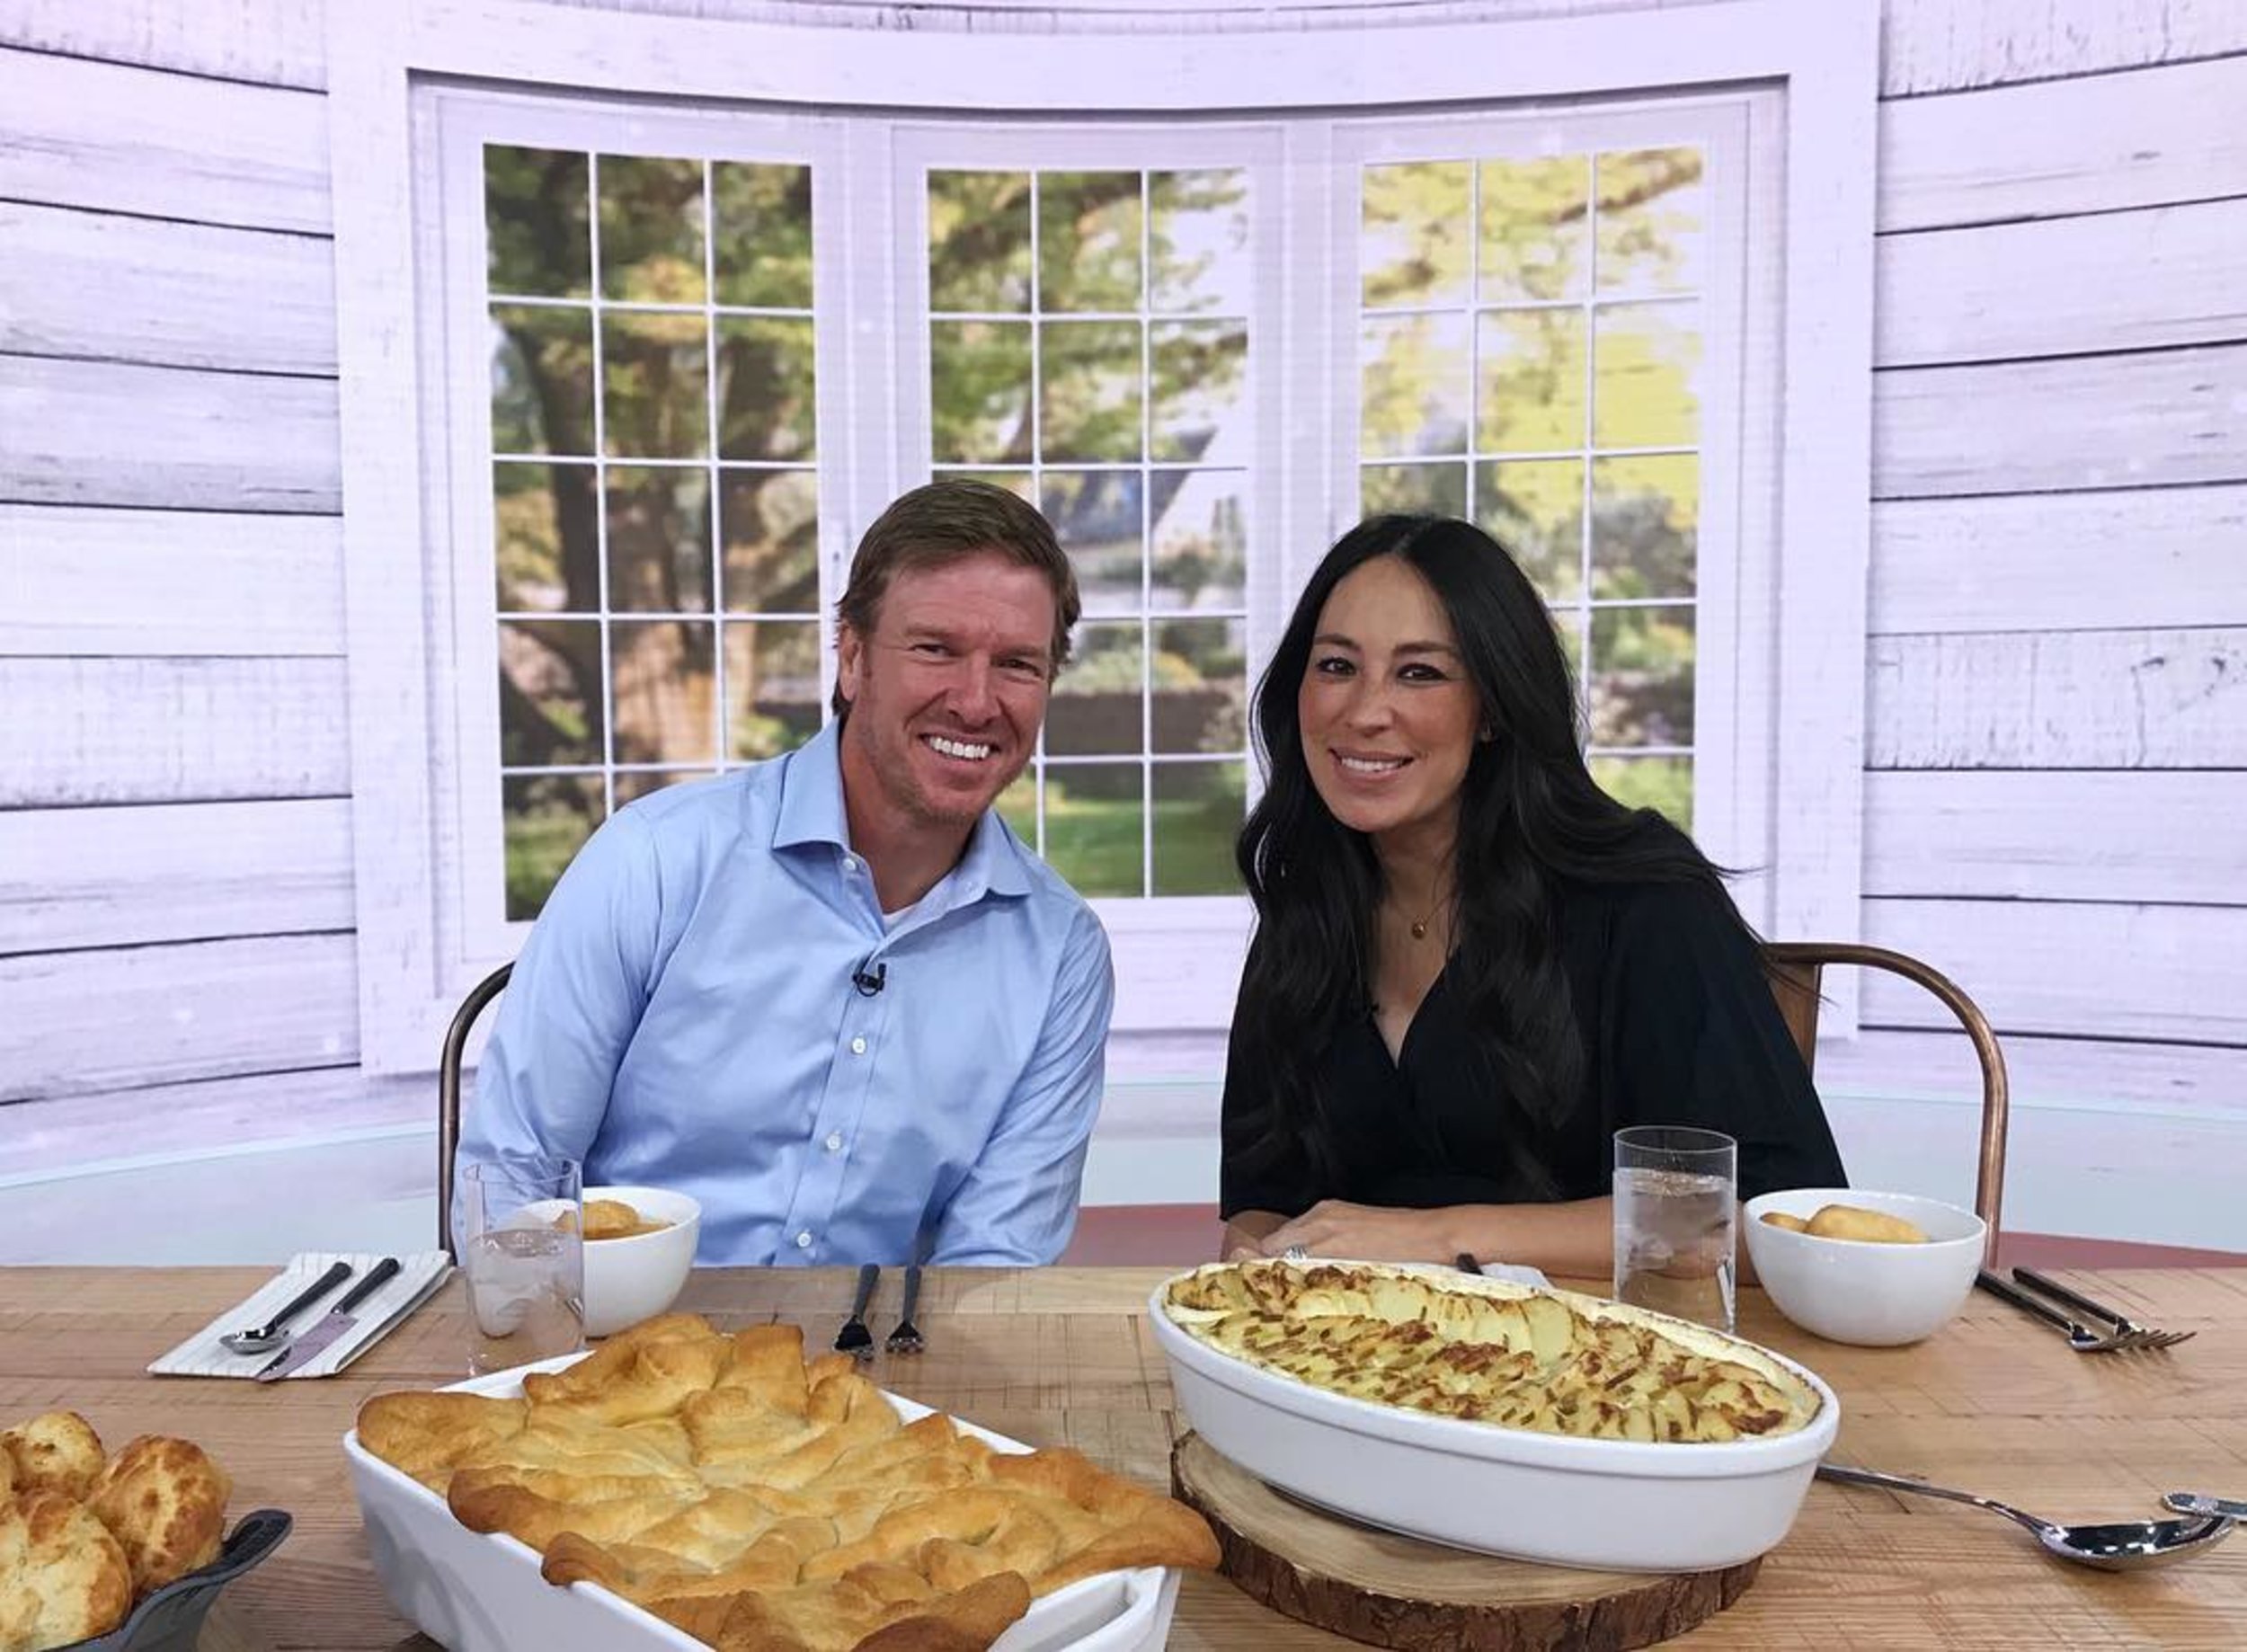 9 Surprising Facts About 'Fixer Upper' - PureWow